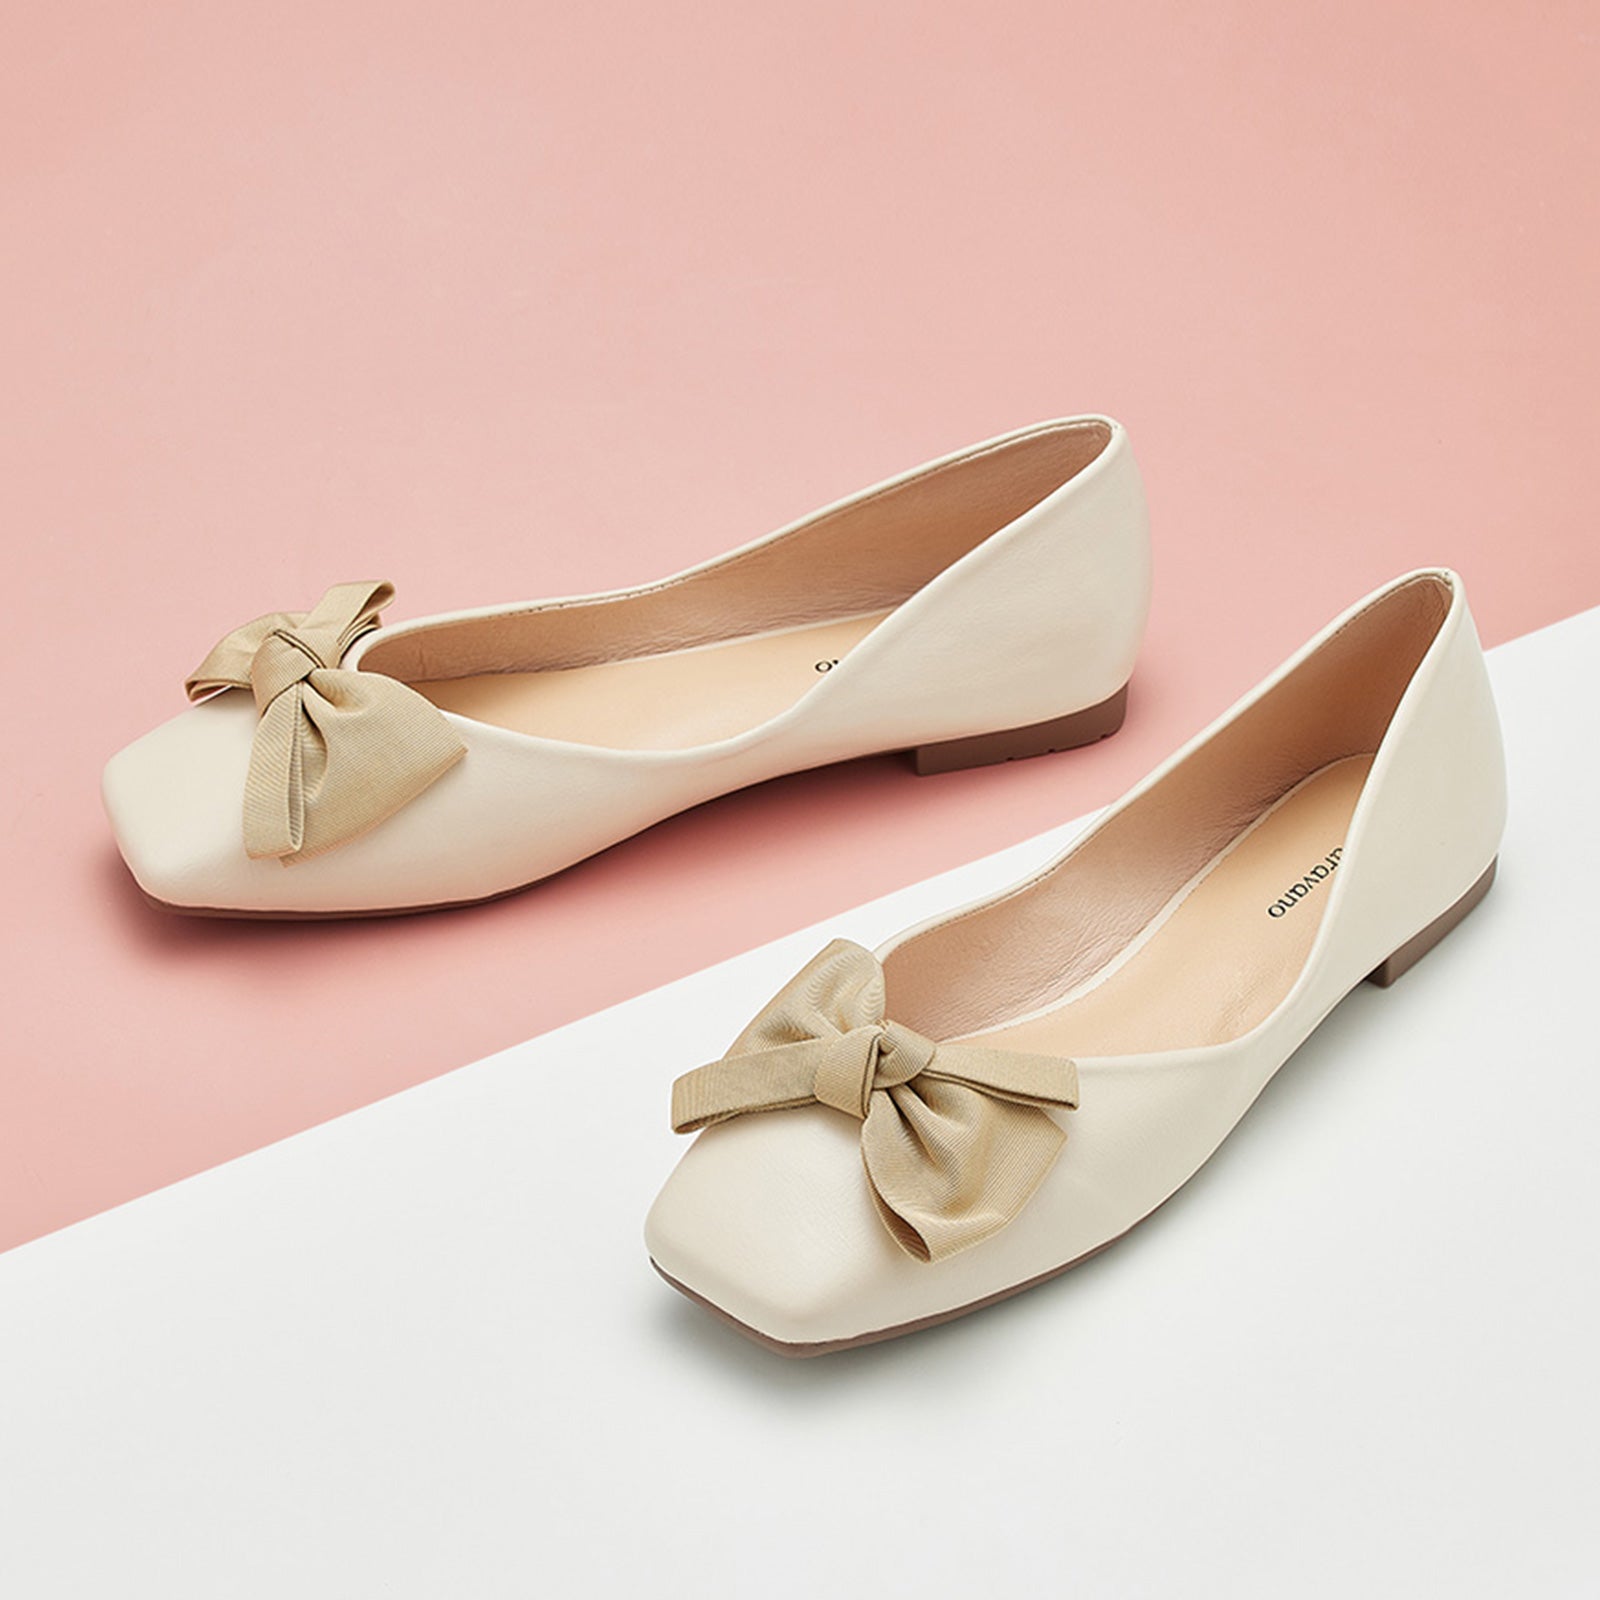  Embrace modern style with these white square-toe flats, featuring a contemporary bowknot detail and crafted from soft leather for a fashionable and comfortable ensemble.